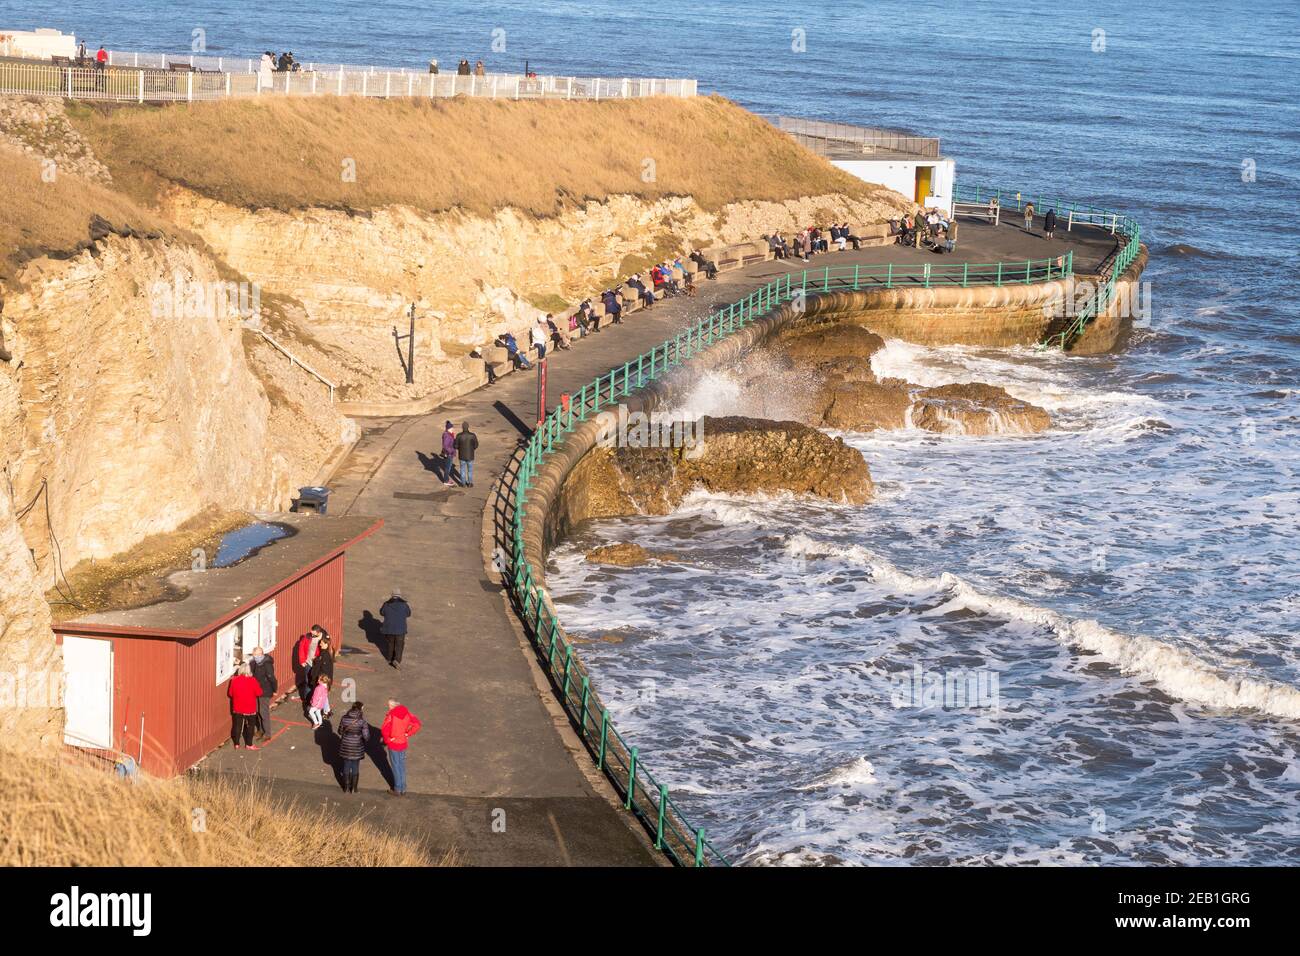 People enjoying a sea view and winter sunshine at Roker in Sunderland, north east England, UK Stock Photo